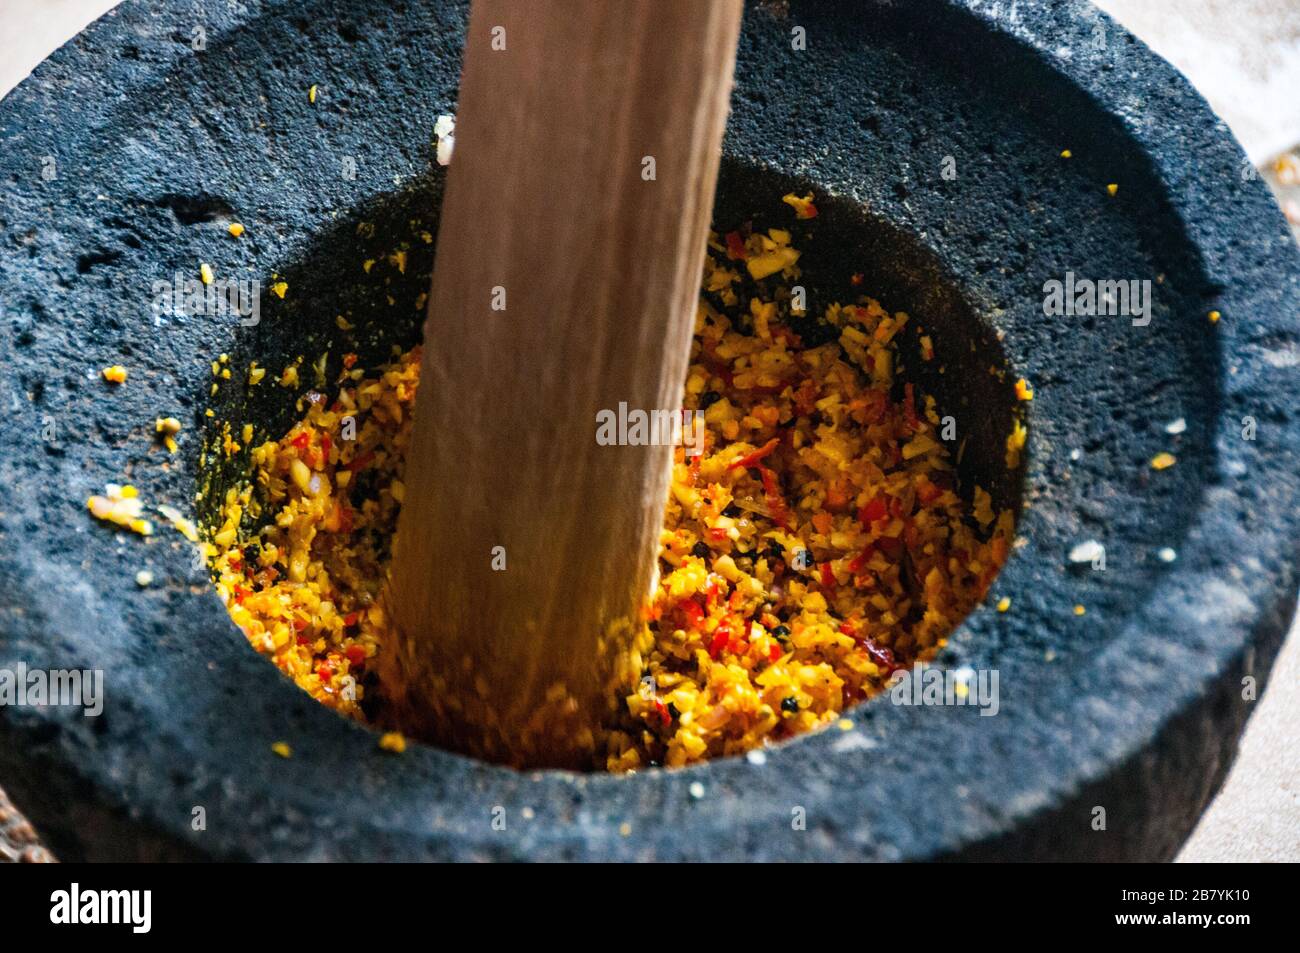 Balinese basic yellow sauce being made in a traditional lesung, mortar and pestle, Stock Photo